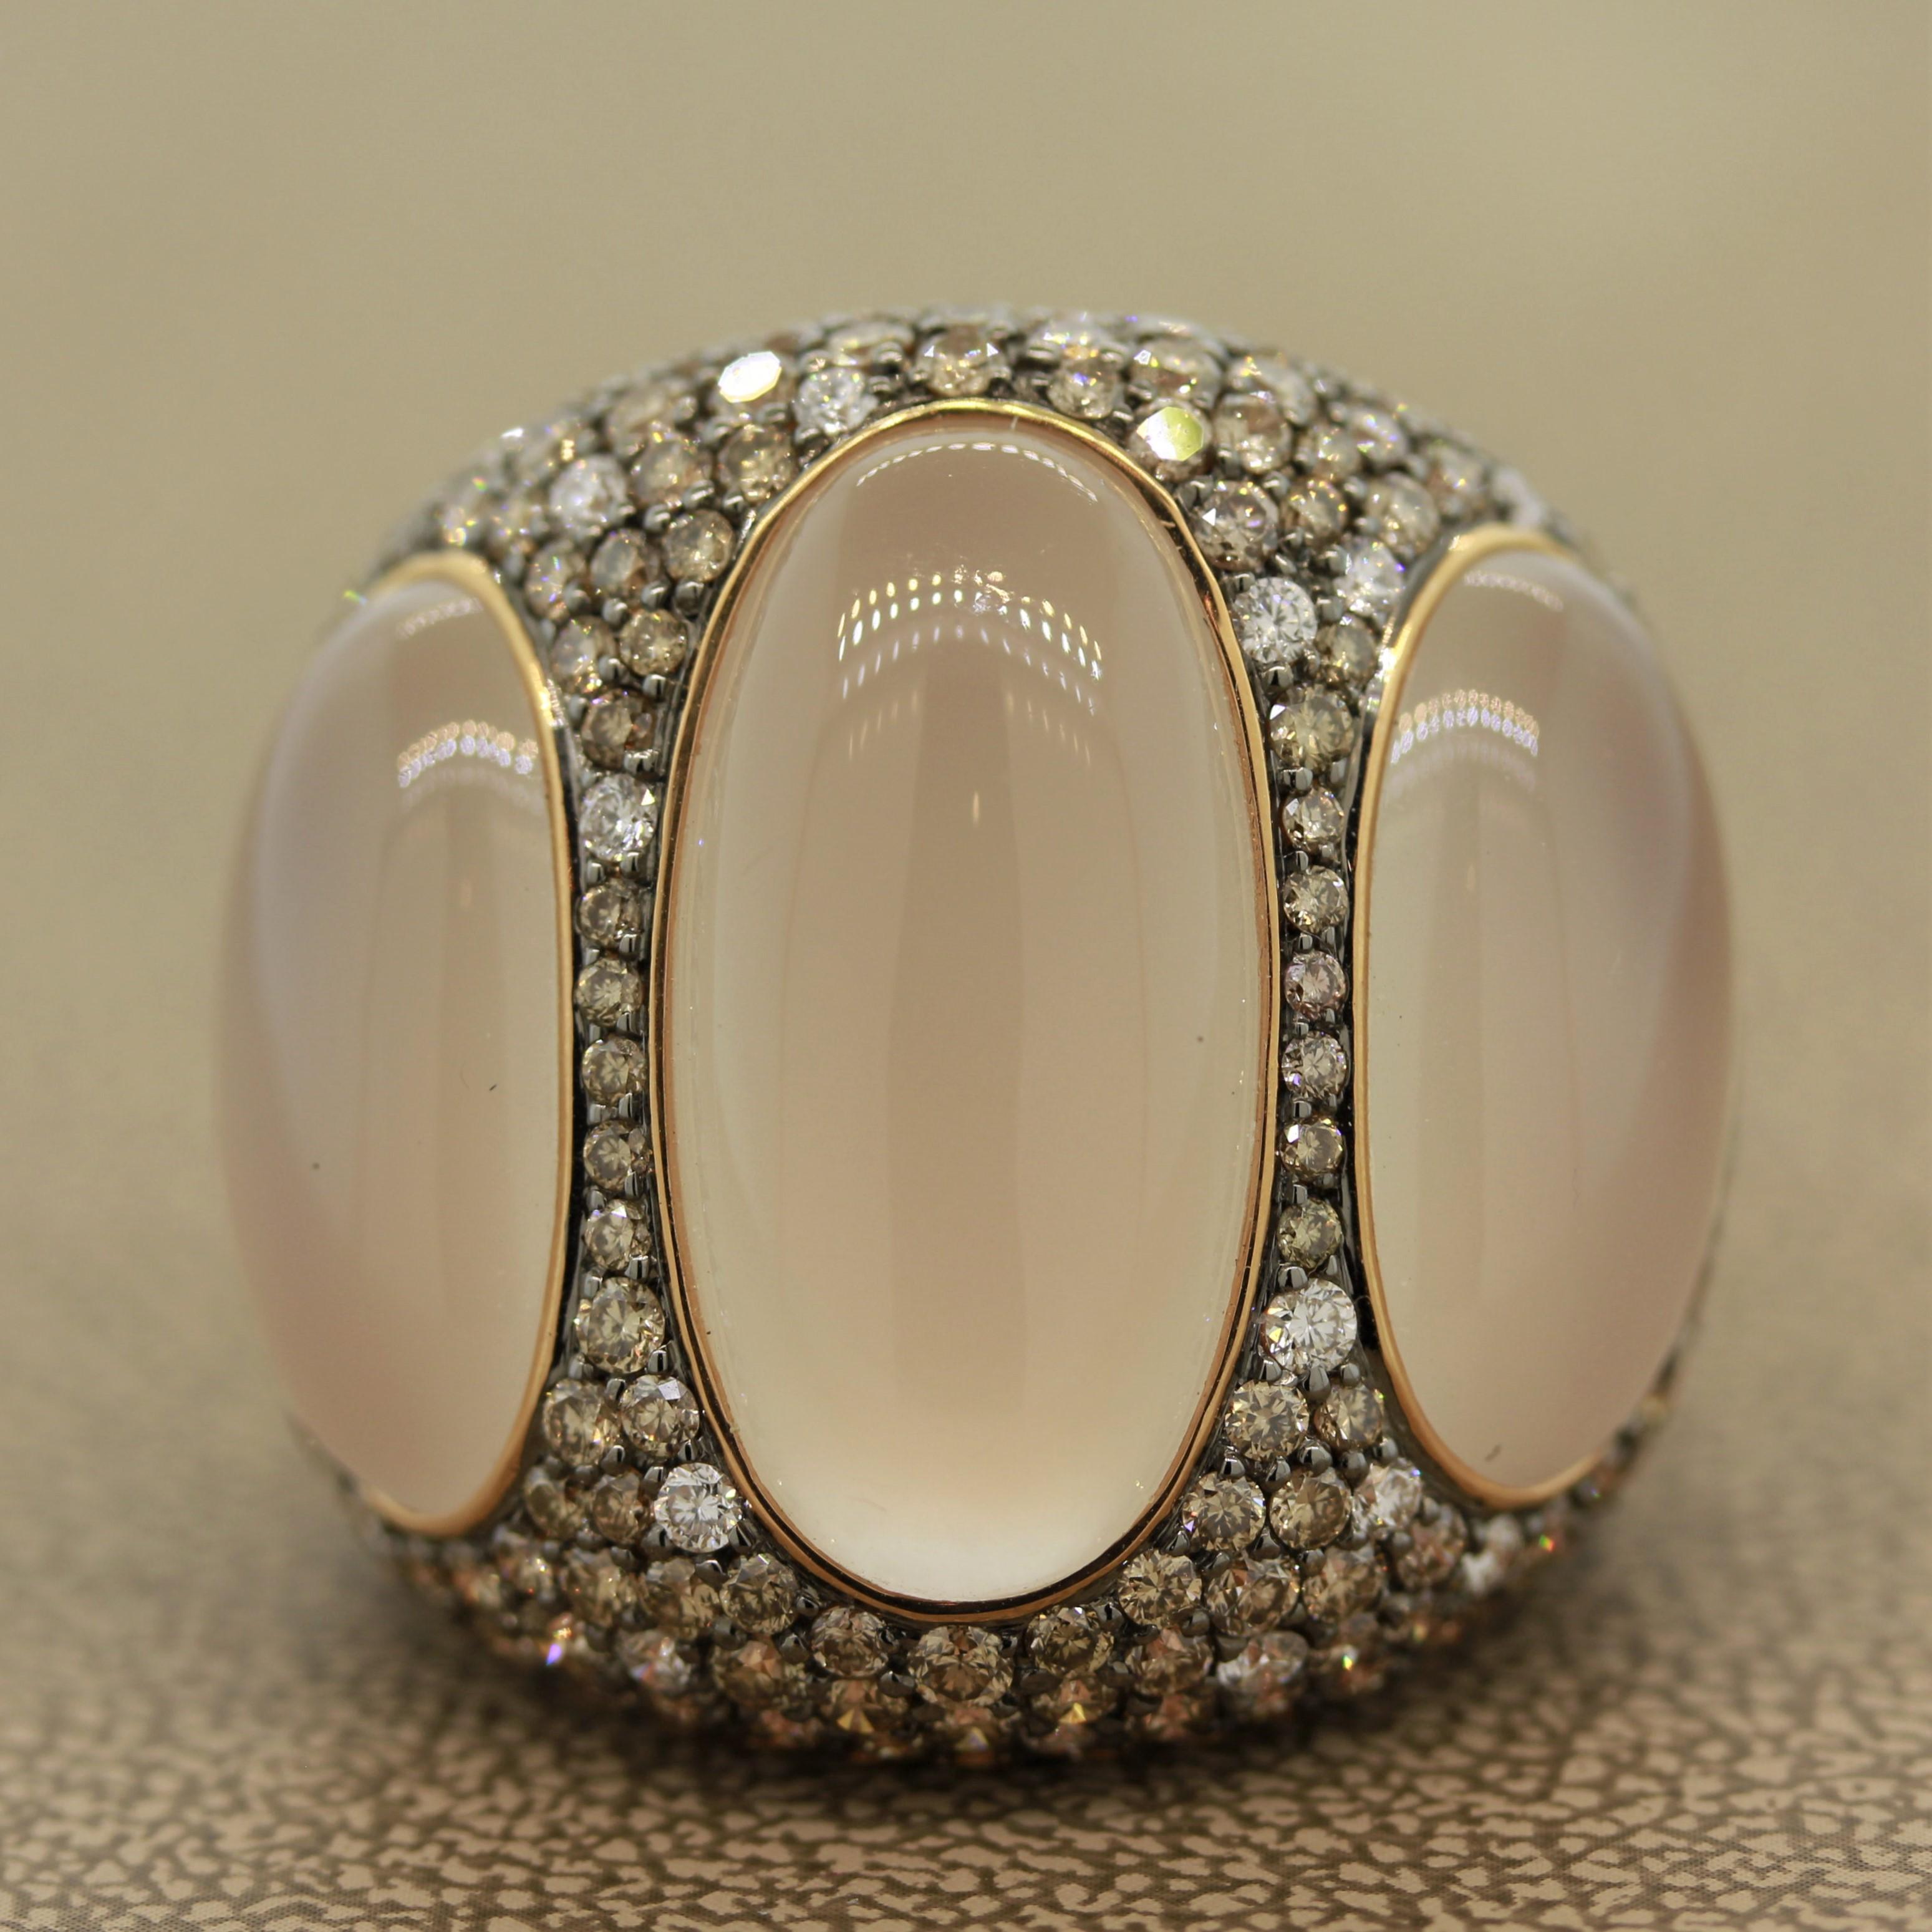 A lovely modern designed cocktail ring featuring 3 oval shaped cabochon moonstones weighing a total of 27.28 carats. They are surrounded by fancy colored diamonds cut are round brilliants and weighing a total of 5.16 carats. Hand fabricated in 18k